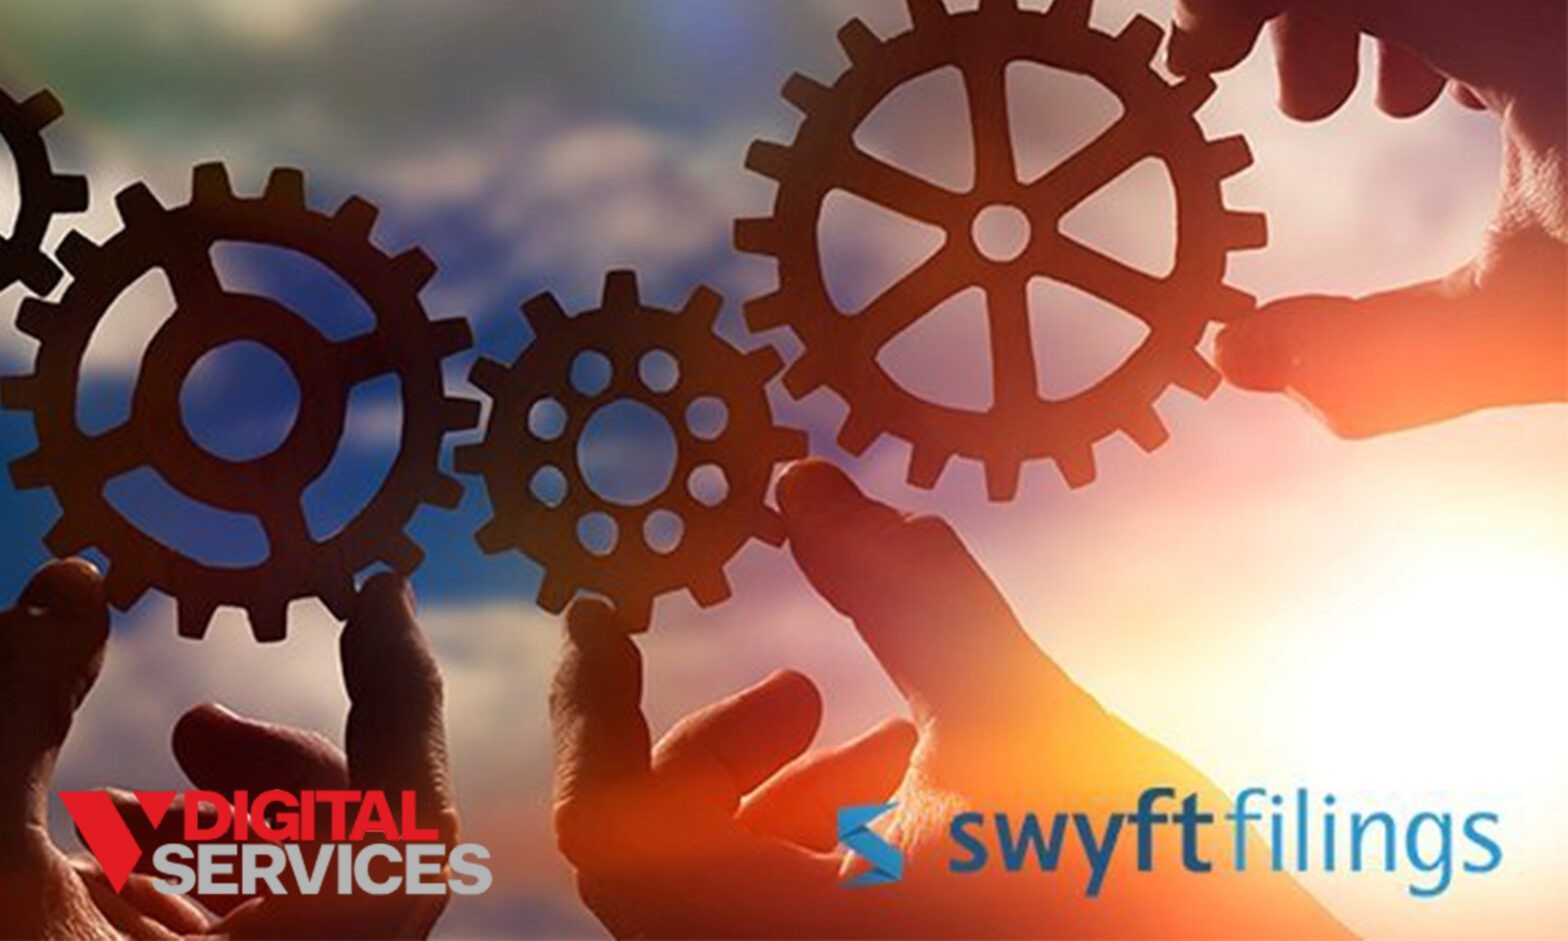 v-digital-services-partners-with-swyft-filings-to-boost-value-for-businesses